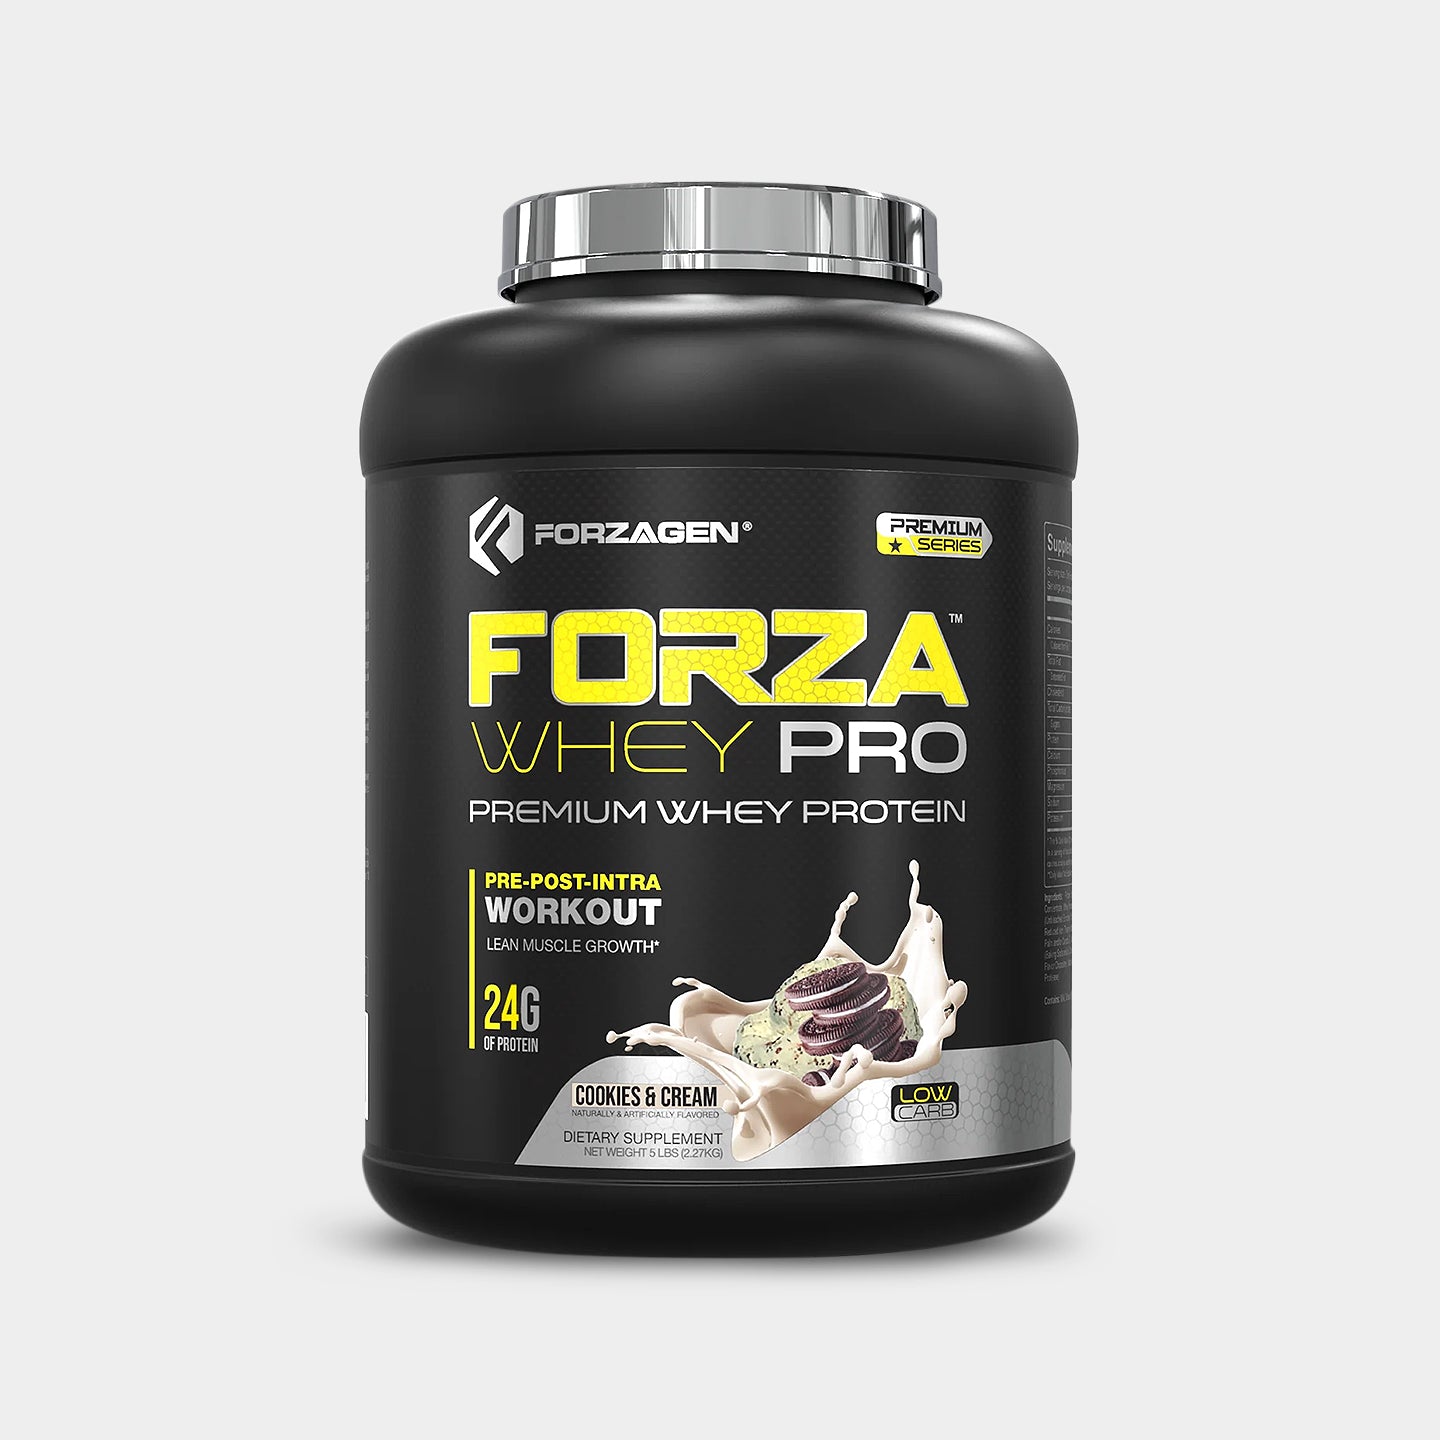 Forzagen Forza Whey PRO Protein, Cookies & Cream, 5 Lbs A1